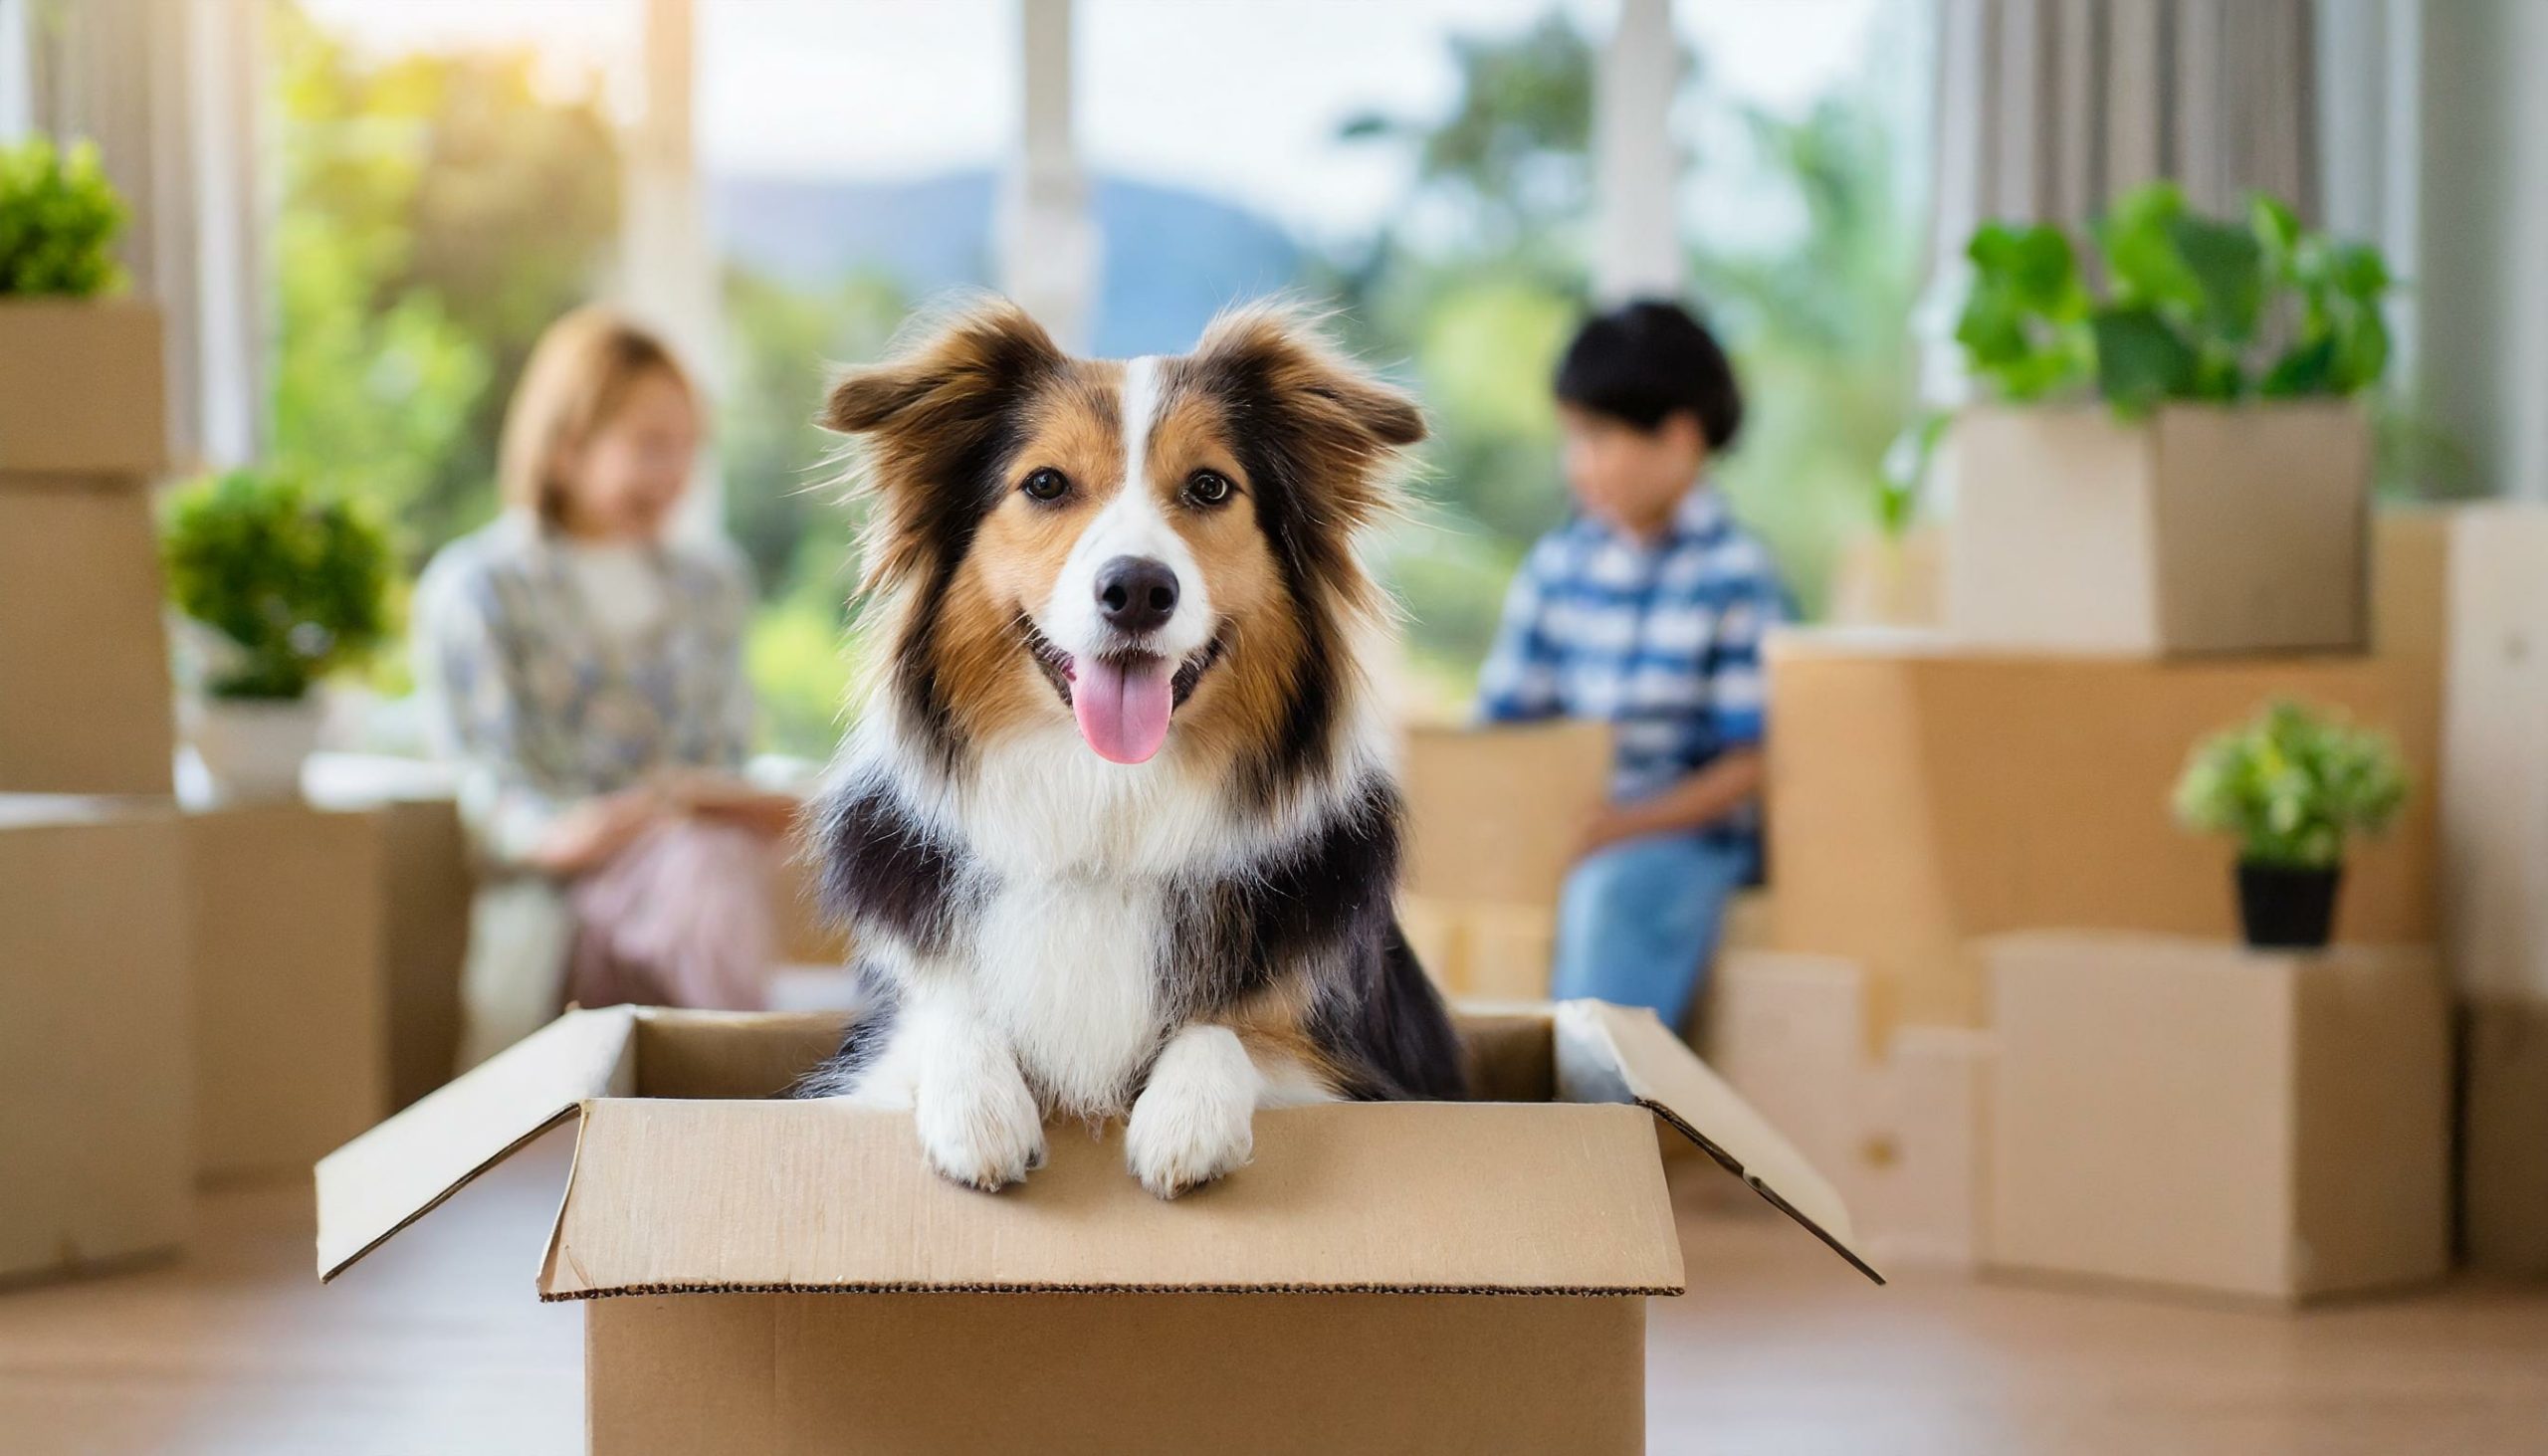 Family with kids and pets moving to new home. Cute dog sitting in cardboard box.